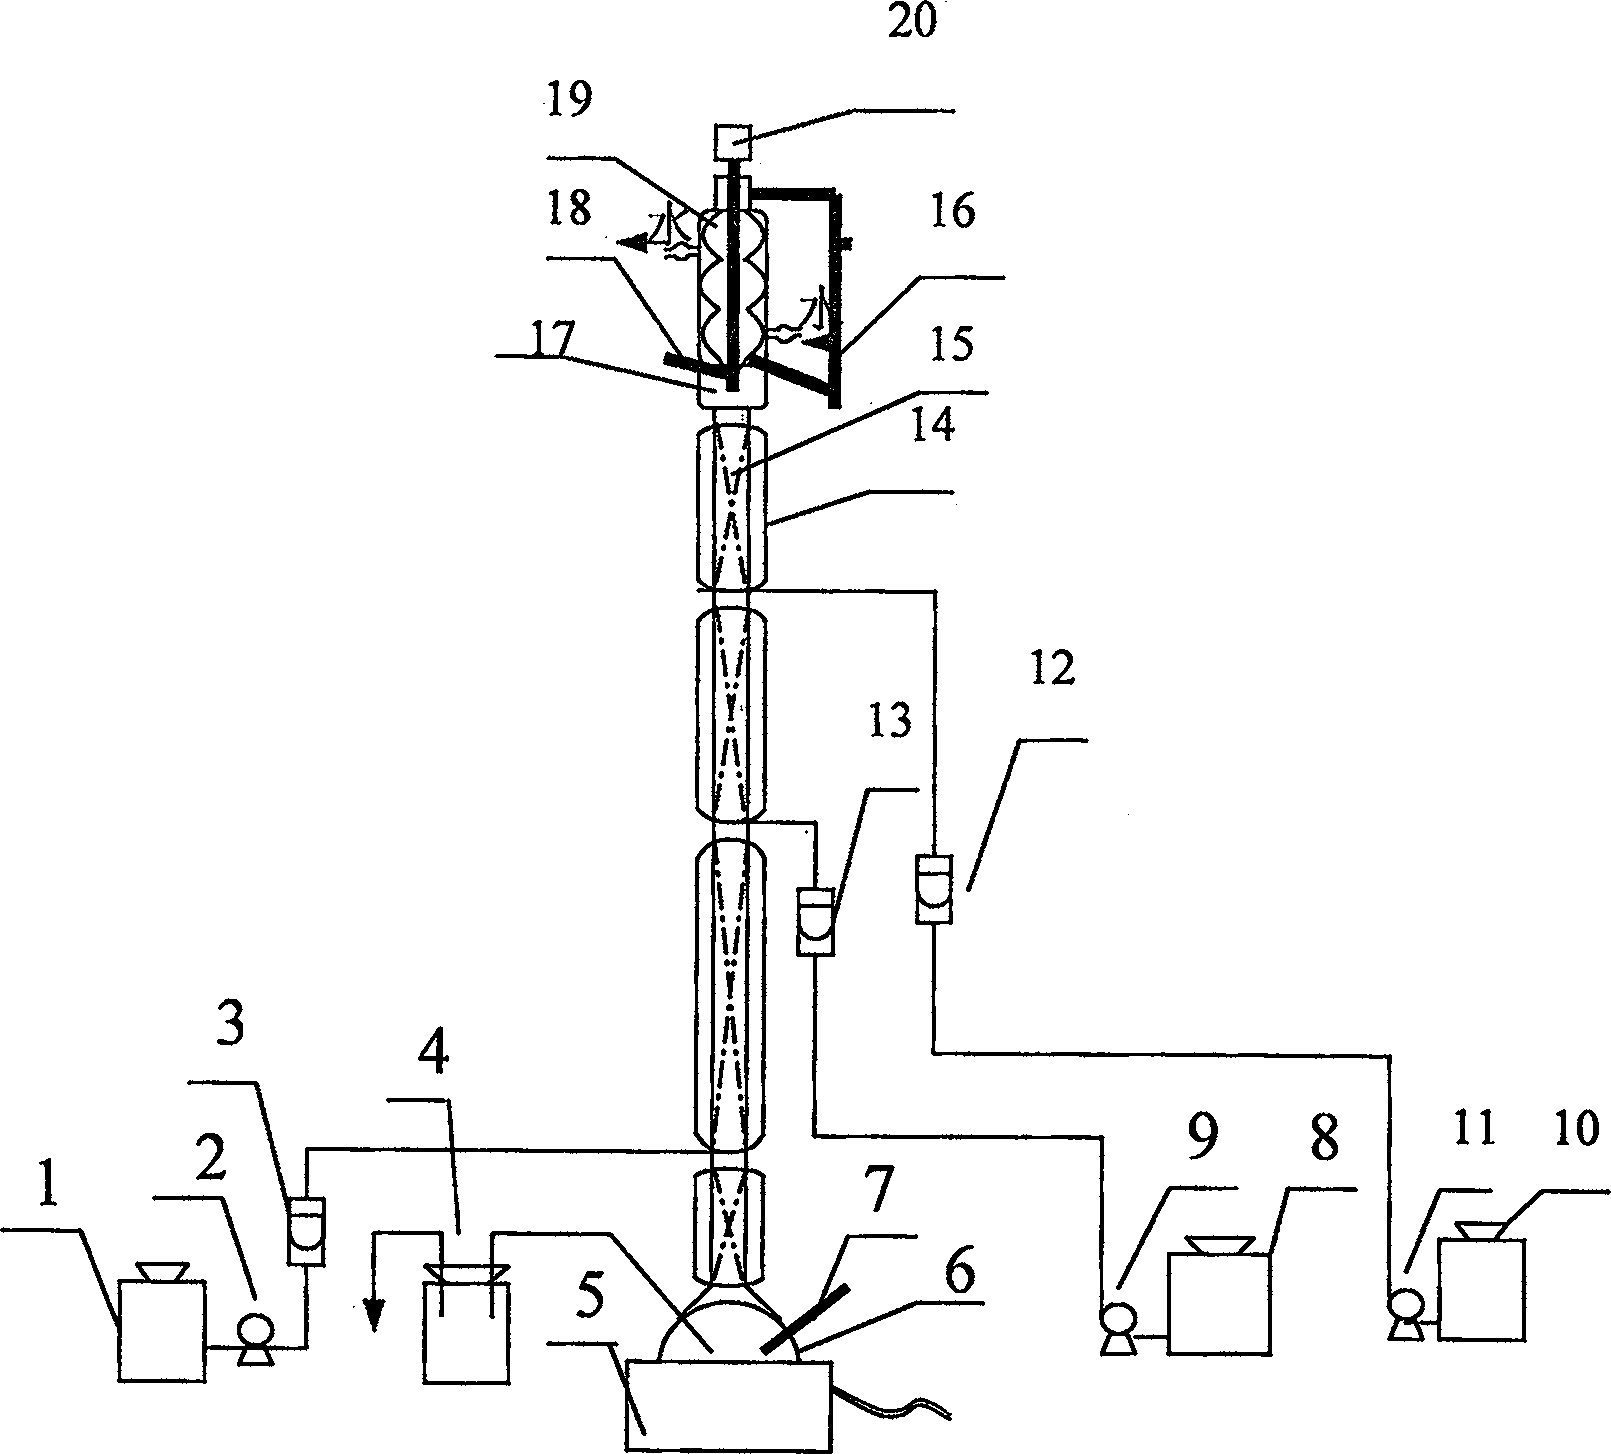 Method for distilling normal heptane and methyl - cyclohexane by using combination of rectification and compound extracted rectification